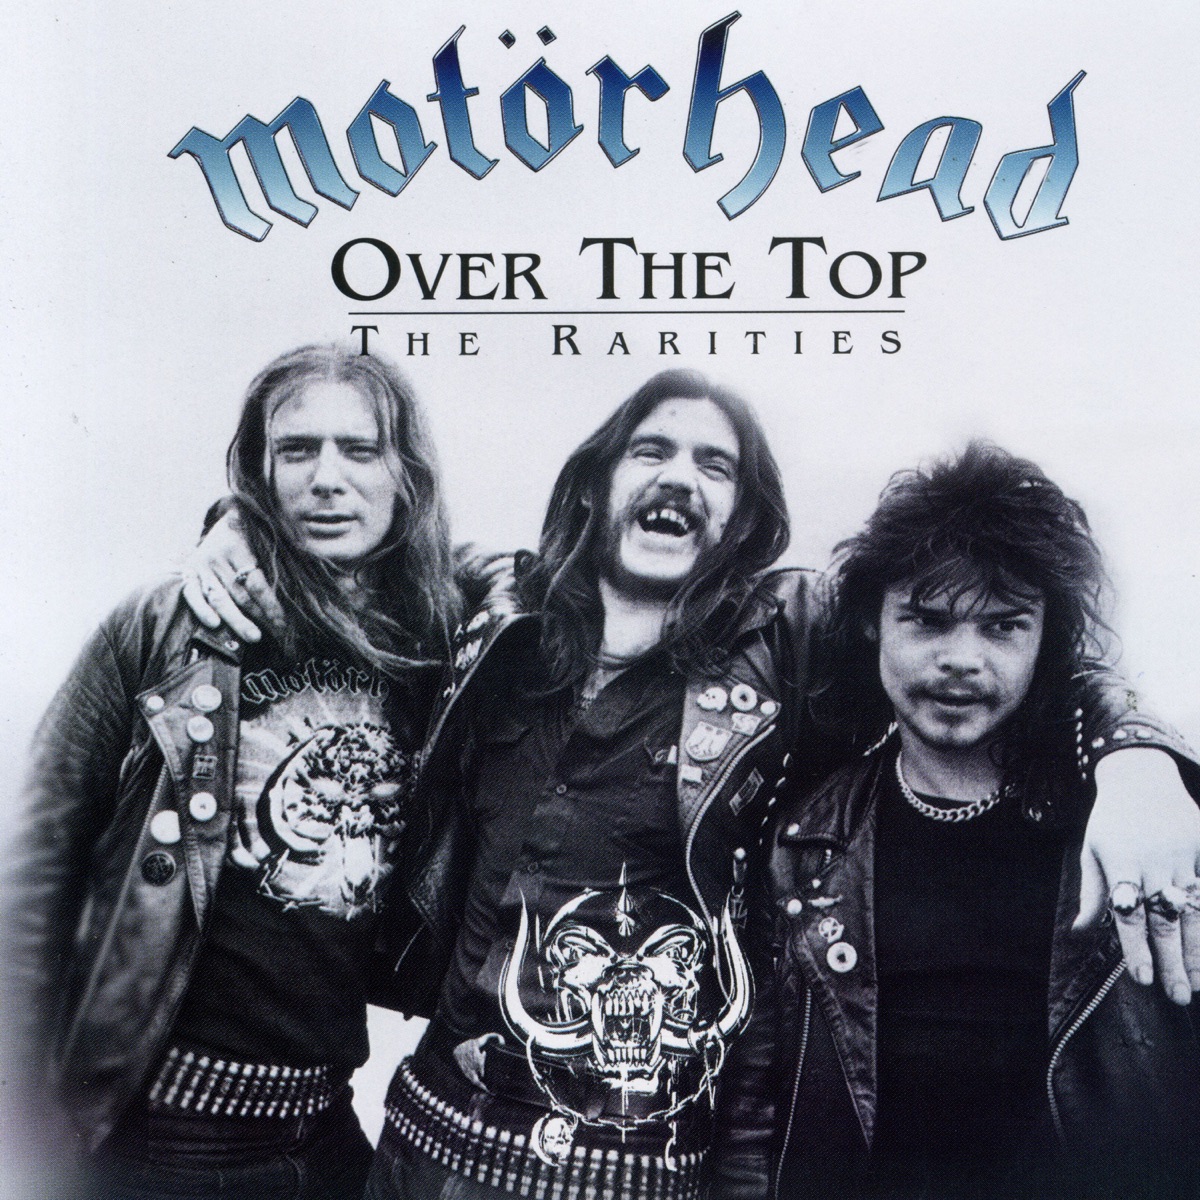 Over the Top: The Rarities by Motörhead on Apple Music